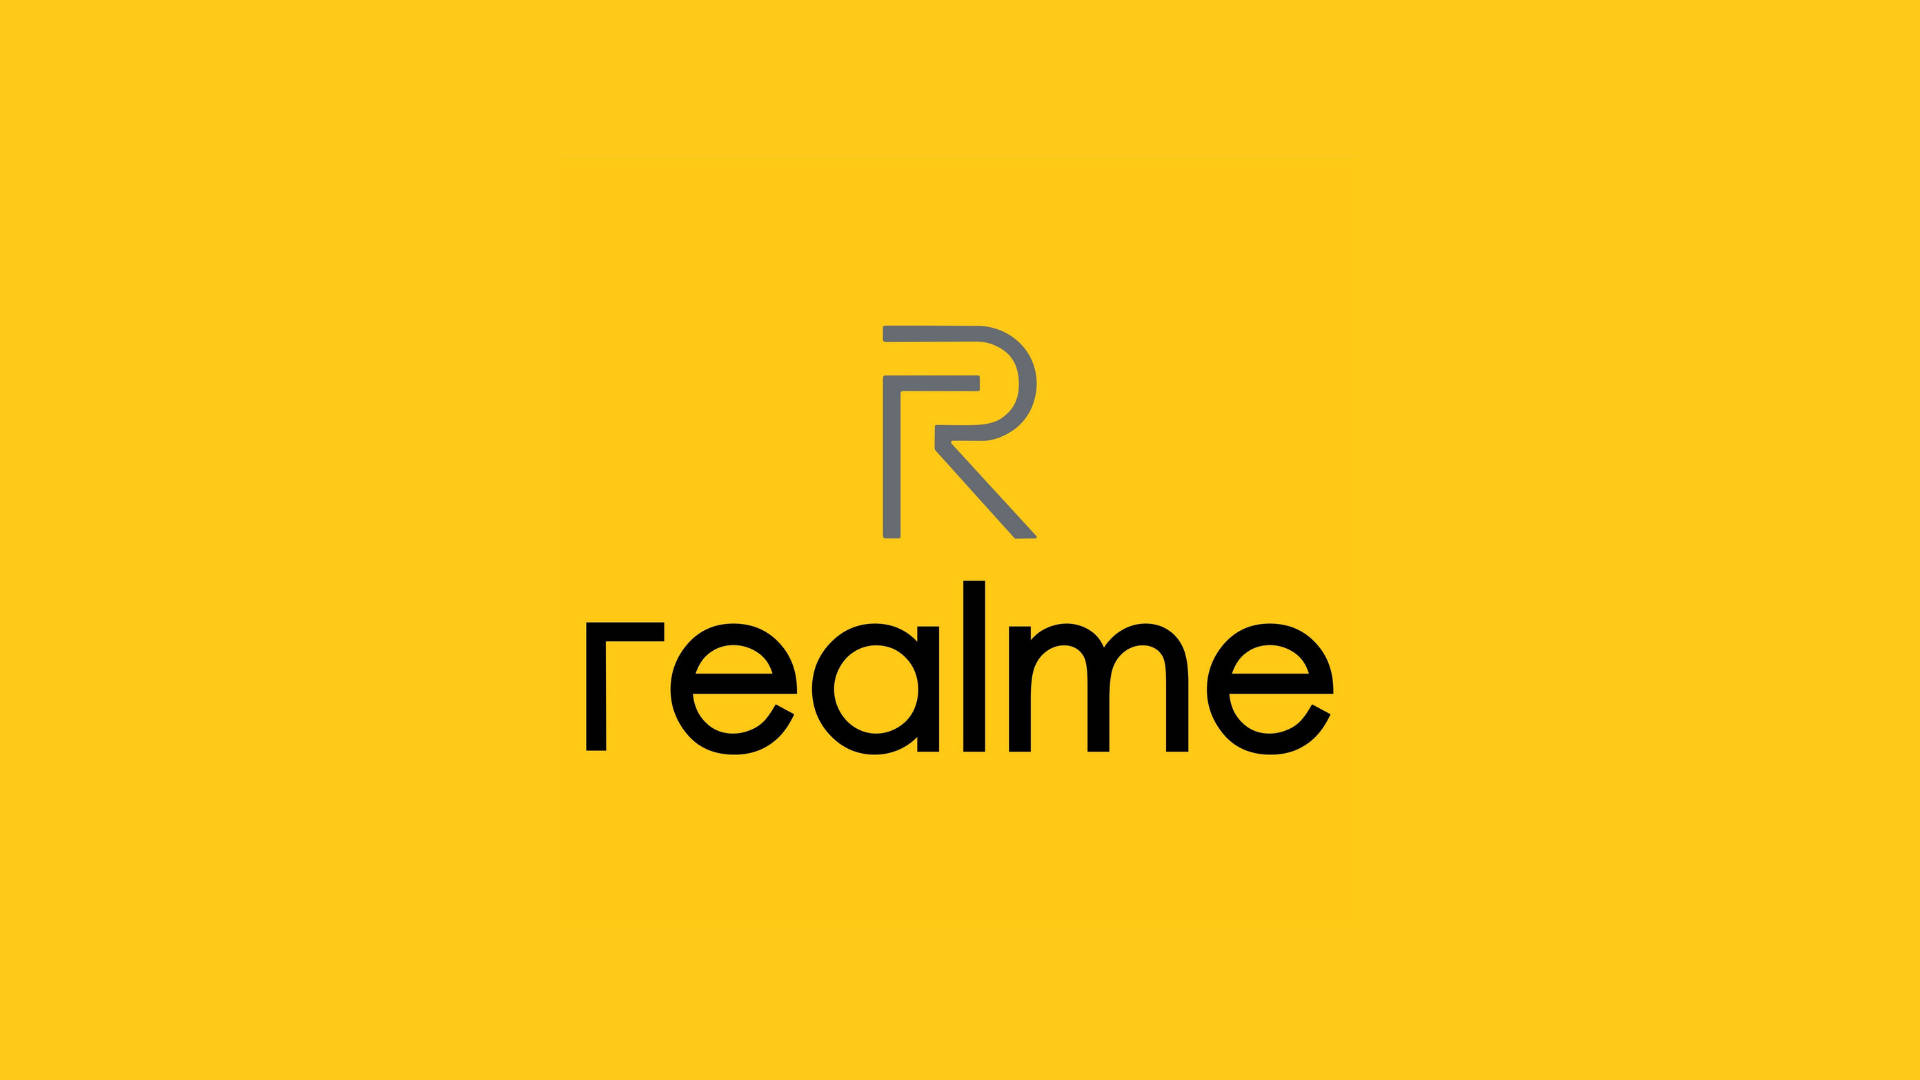 Top 999+ Realme Wallpapers Full HD, 4K✅Free to Use